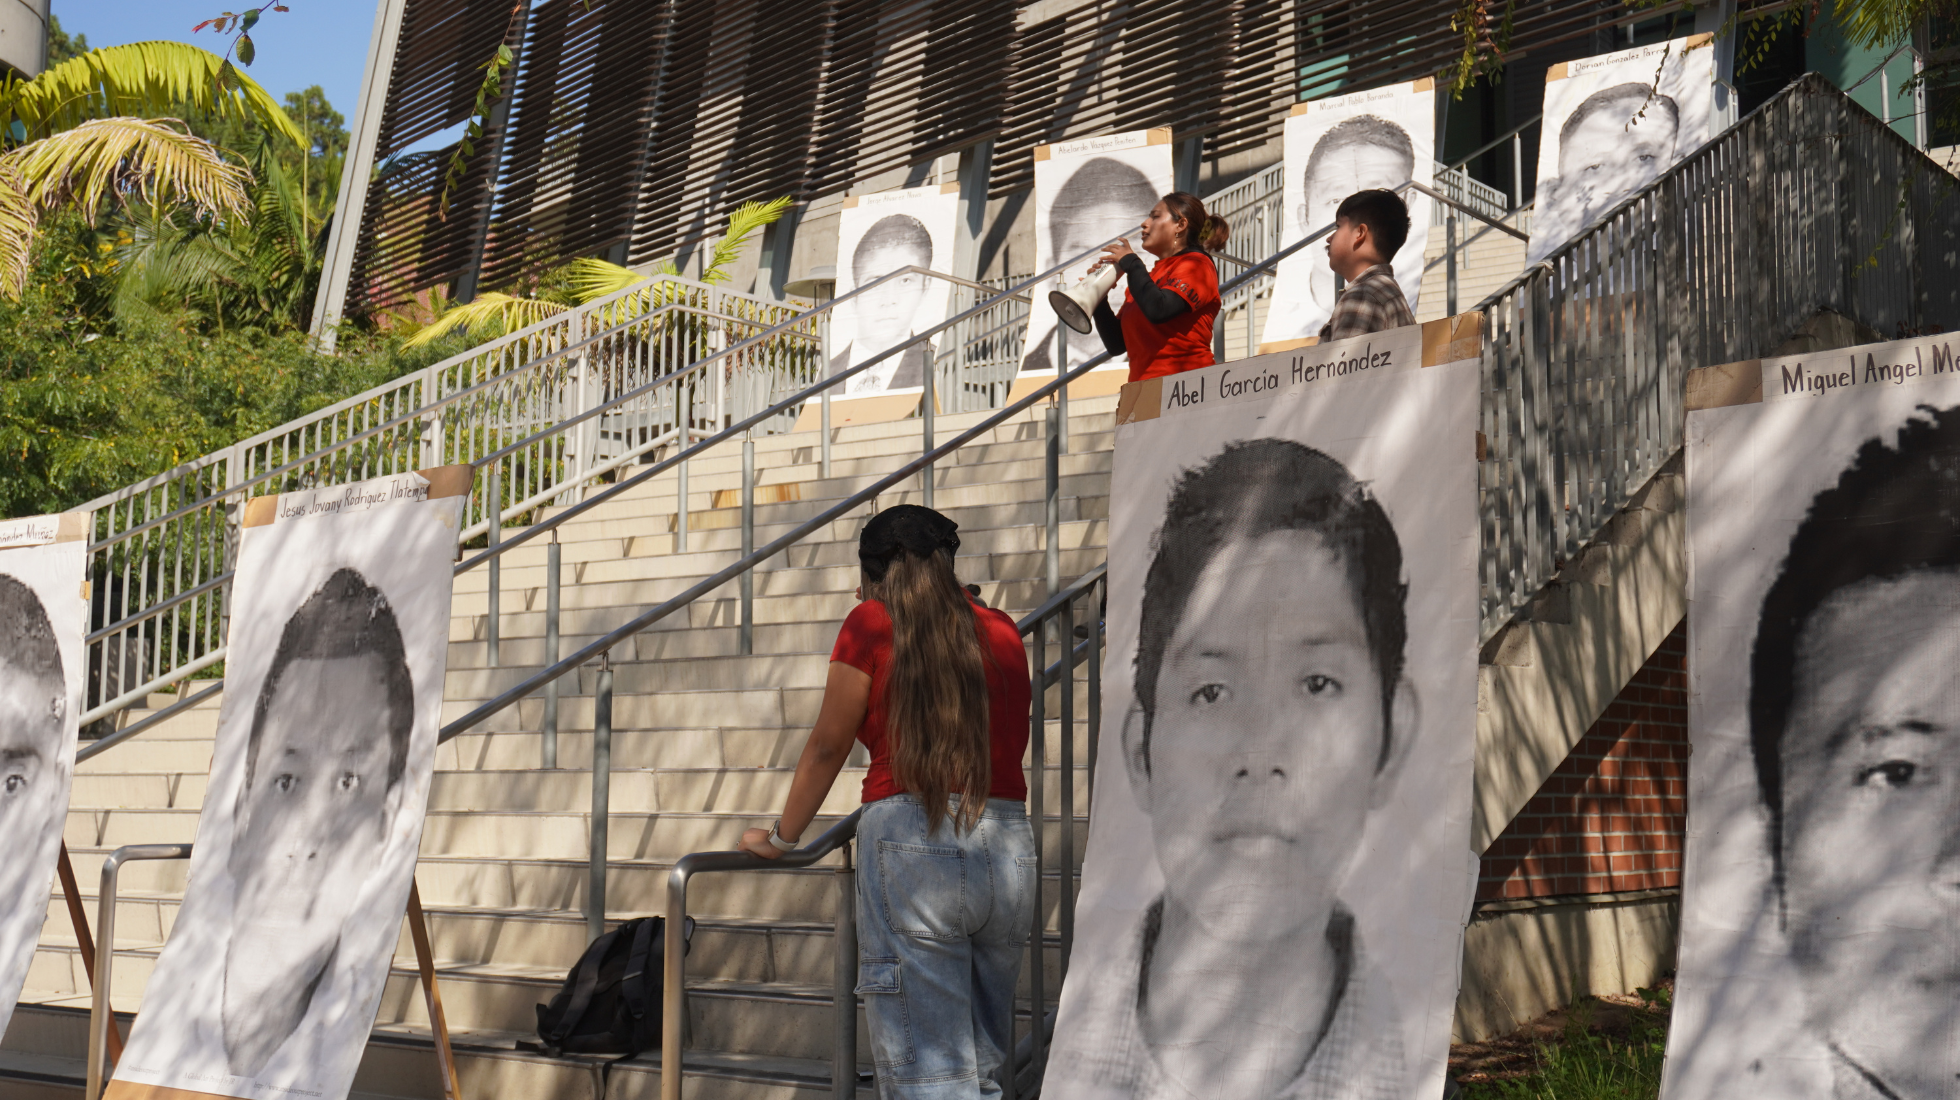 Nicole, a member of the student organization M.E.Ch.A., speaks to the crowd at a rally honoring the 43 missing students from Ayotzinapa, Mexico, September 26, 2023. Photo by Eve McNally